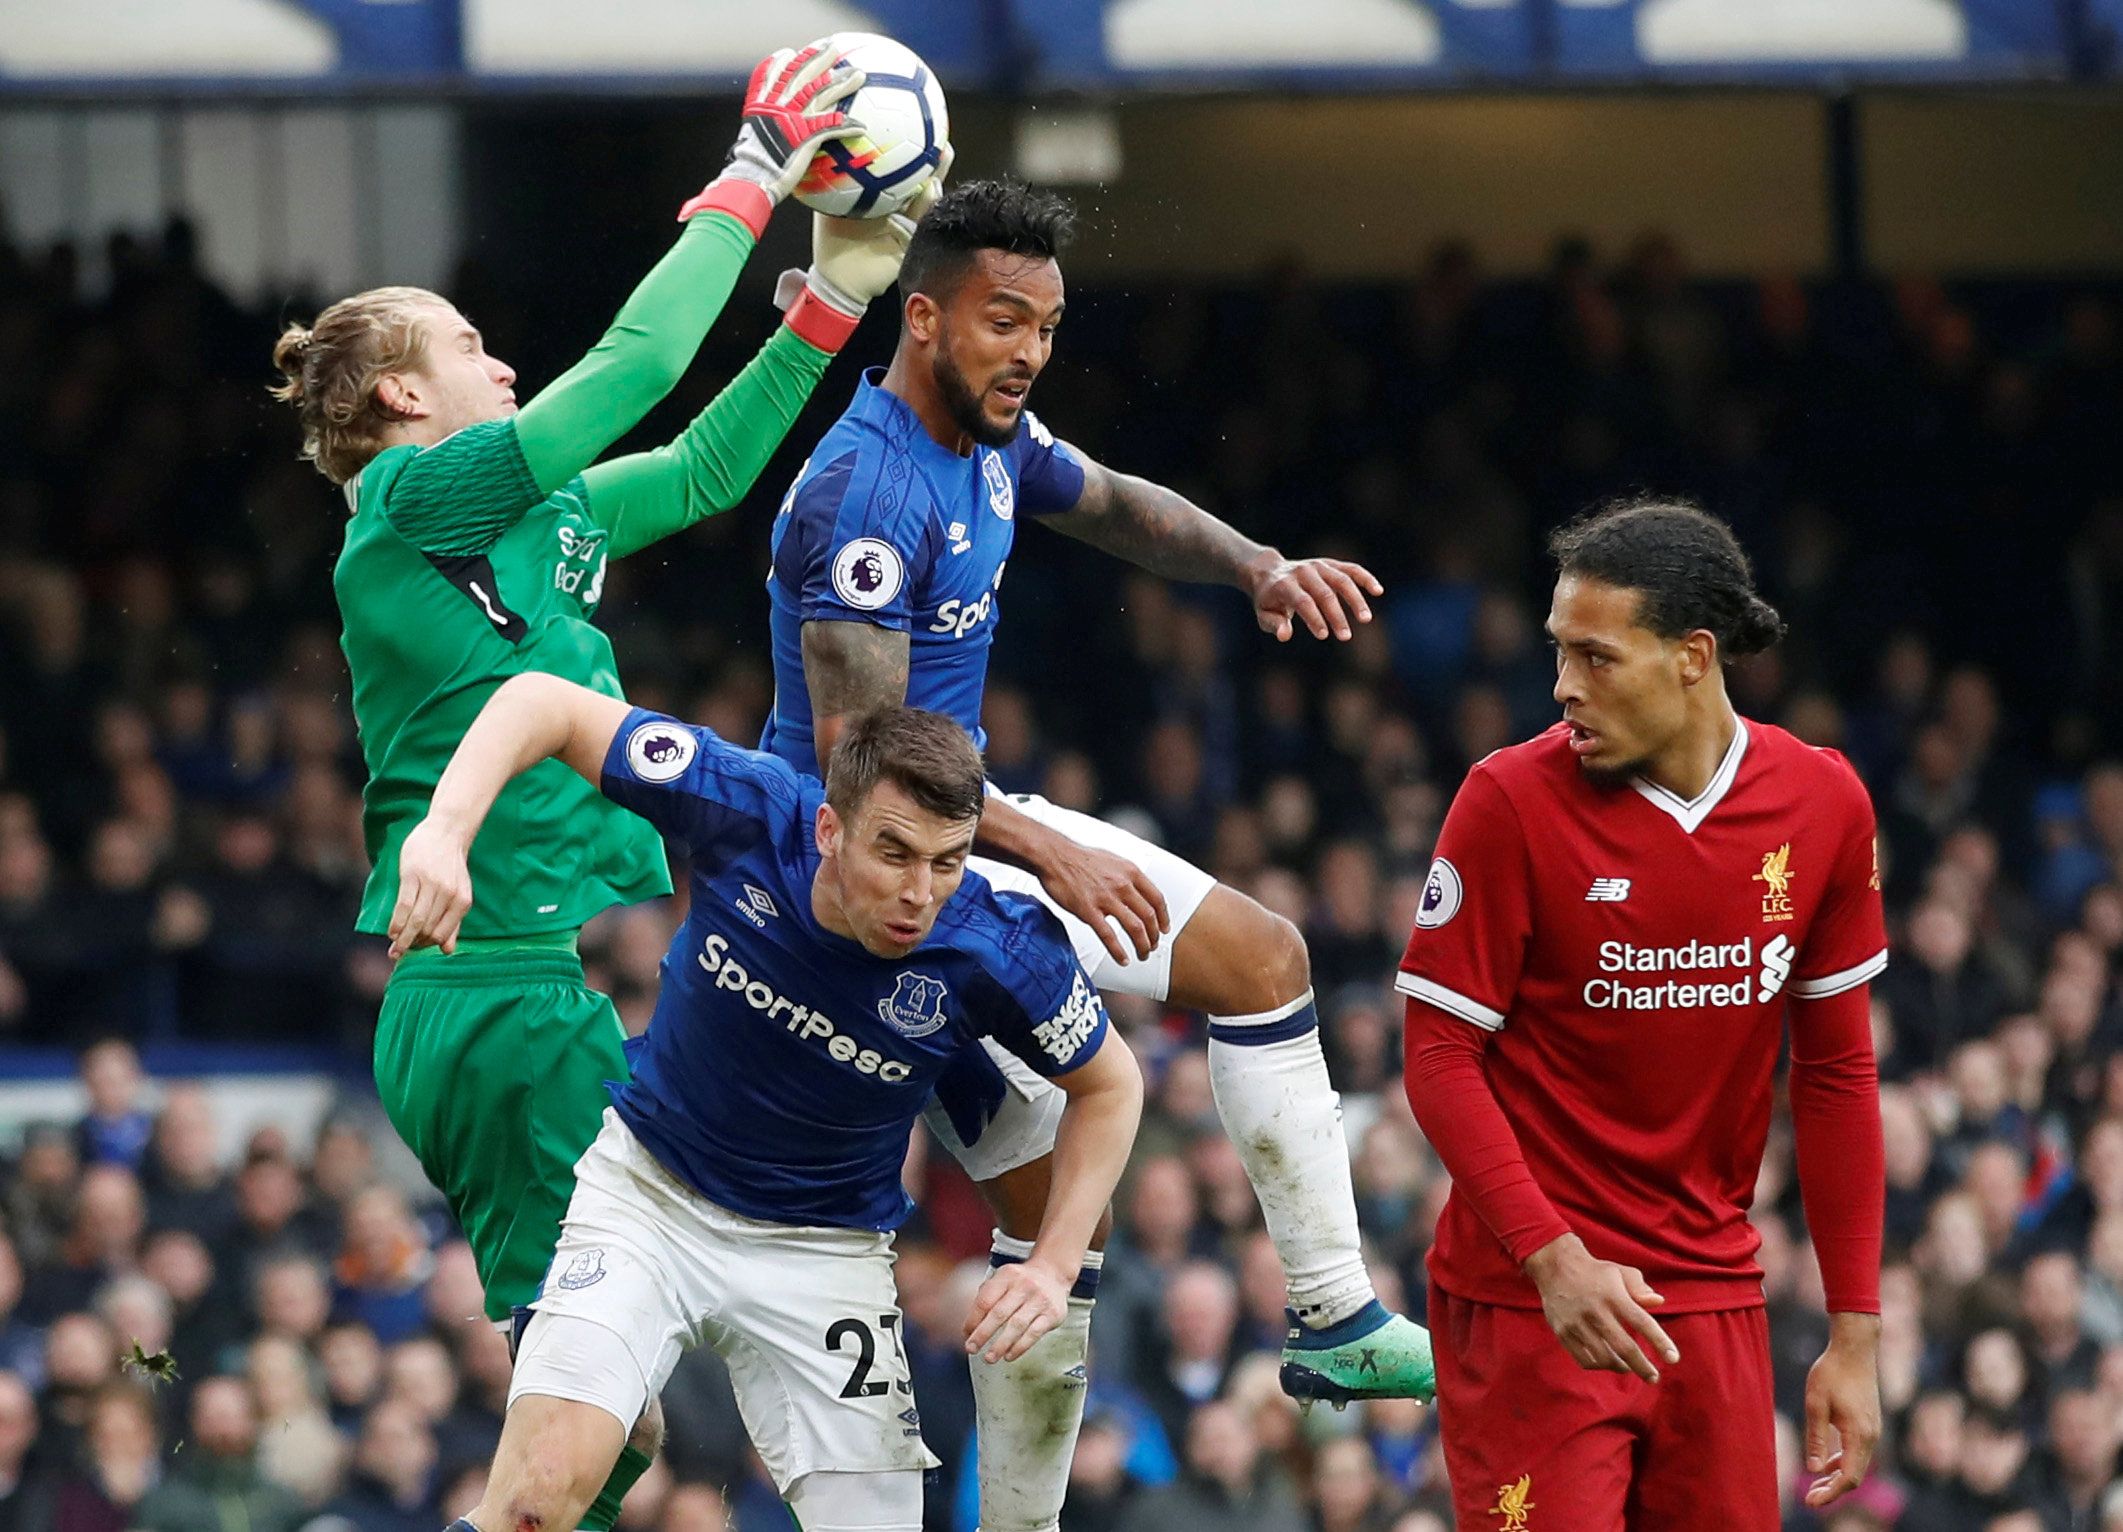 Soccer Football - Premier League - Everton vs Liverpool - Goodison Park, Liverpool, Britain - April 7, 2018   Liverpool's Loris Karius gathers from Everton's Theo Walcott and Seamus Coleman as Liverpool's Virgil van Dijk looks on   Action Images via Reuters/Carl Recine    EDITORIAL USE ONLY. No use with unauthorized audio, video, data, fixture lists, club/league logos or 